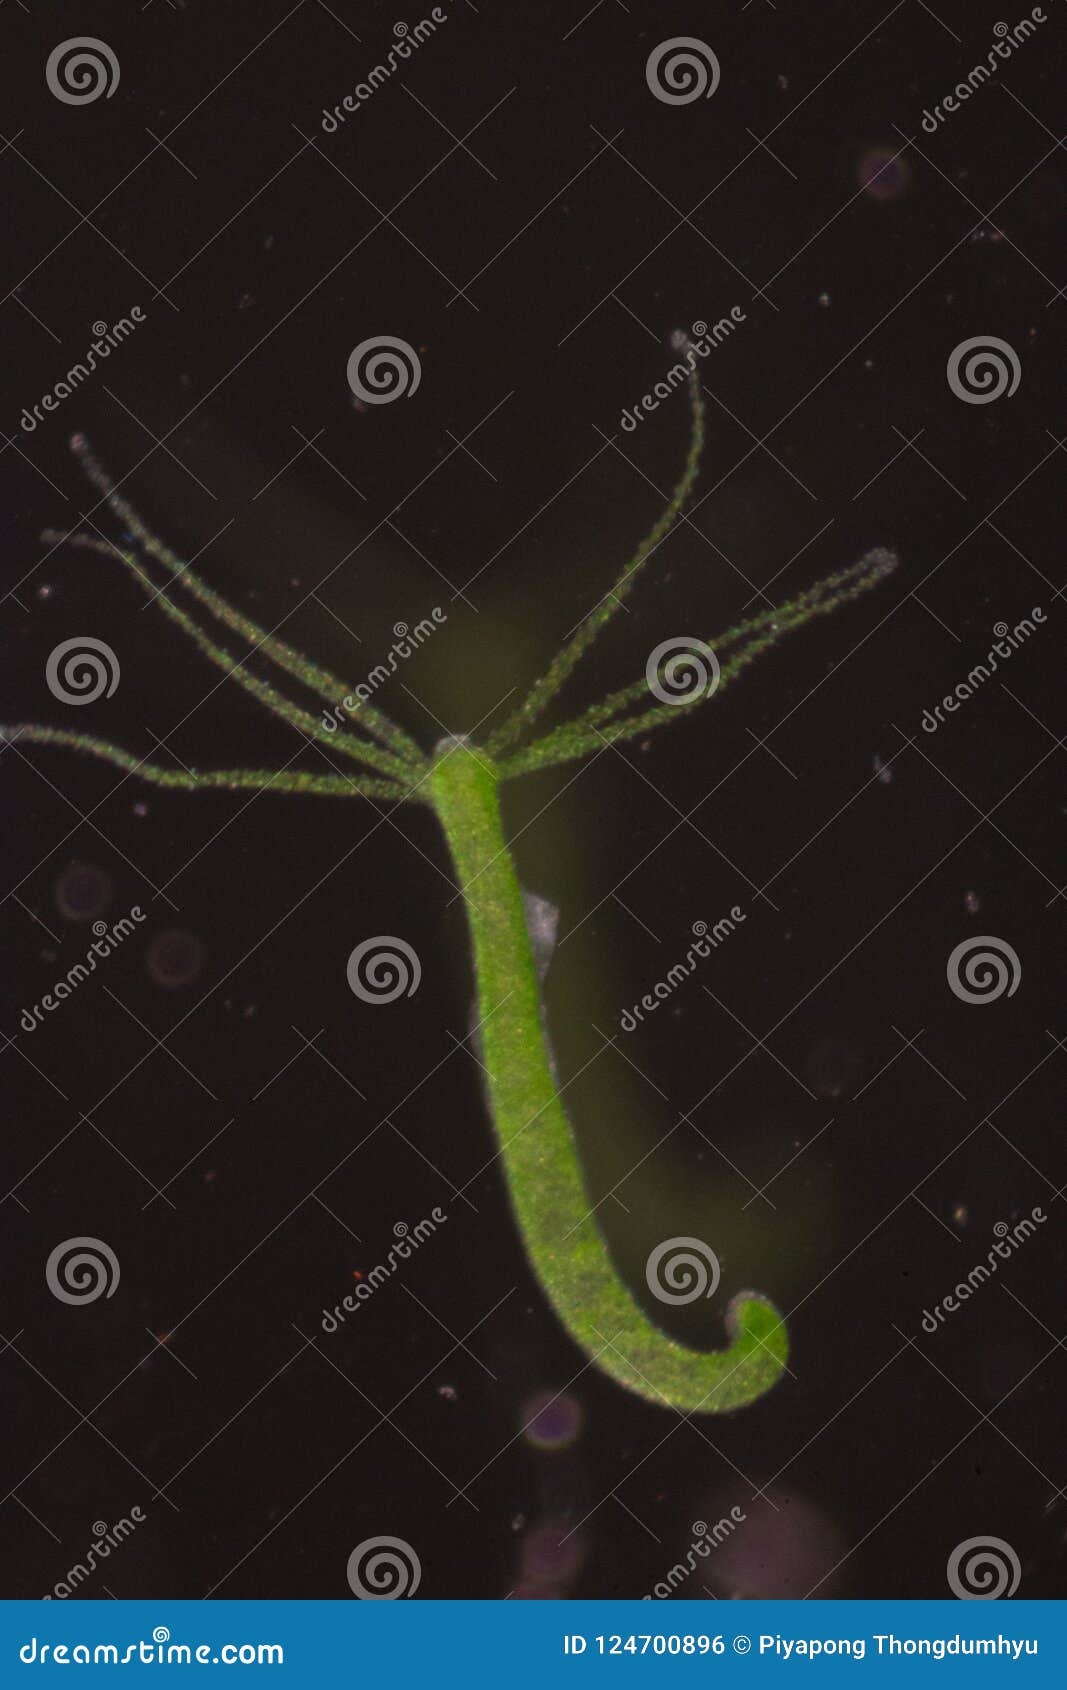 hydra is a genus of small, fresh-water animals of the phylum cnidaria and class hydrozoa.